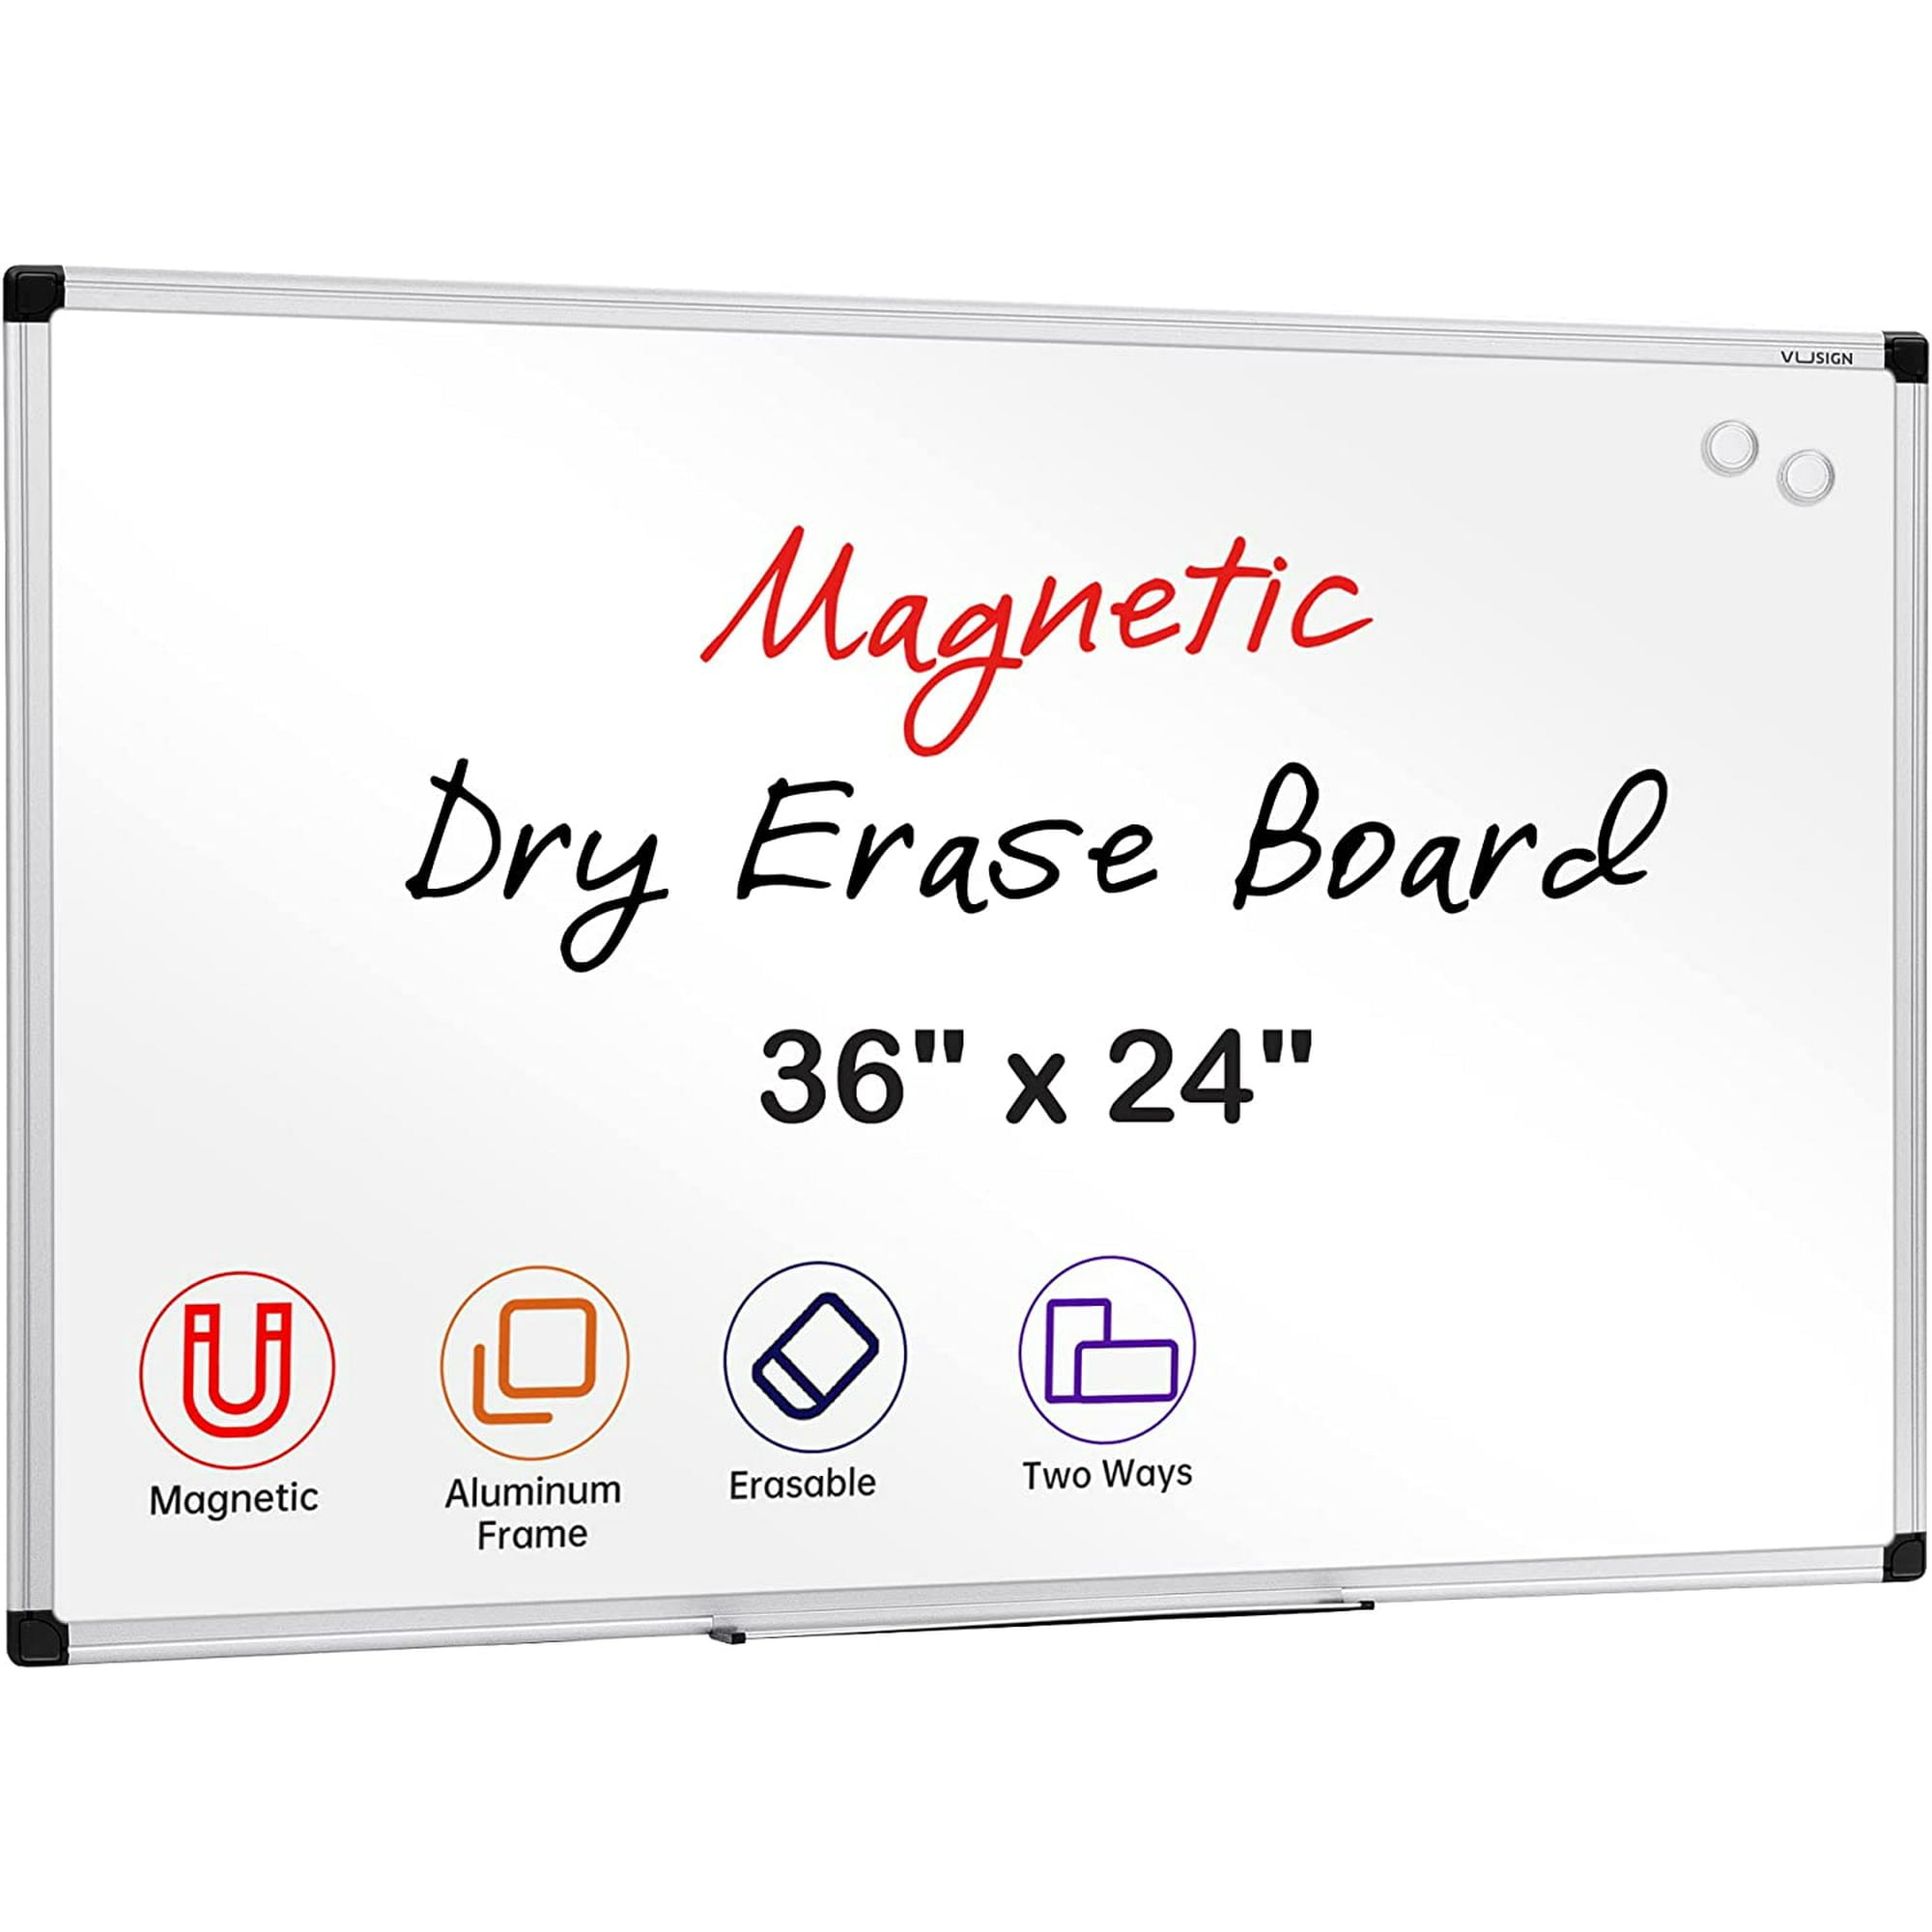 Primary School Portable Magnetic Whiteboard for Wall Dry Erase